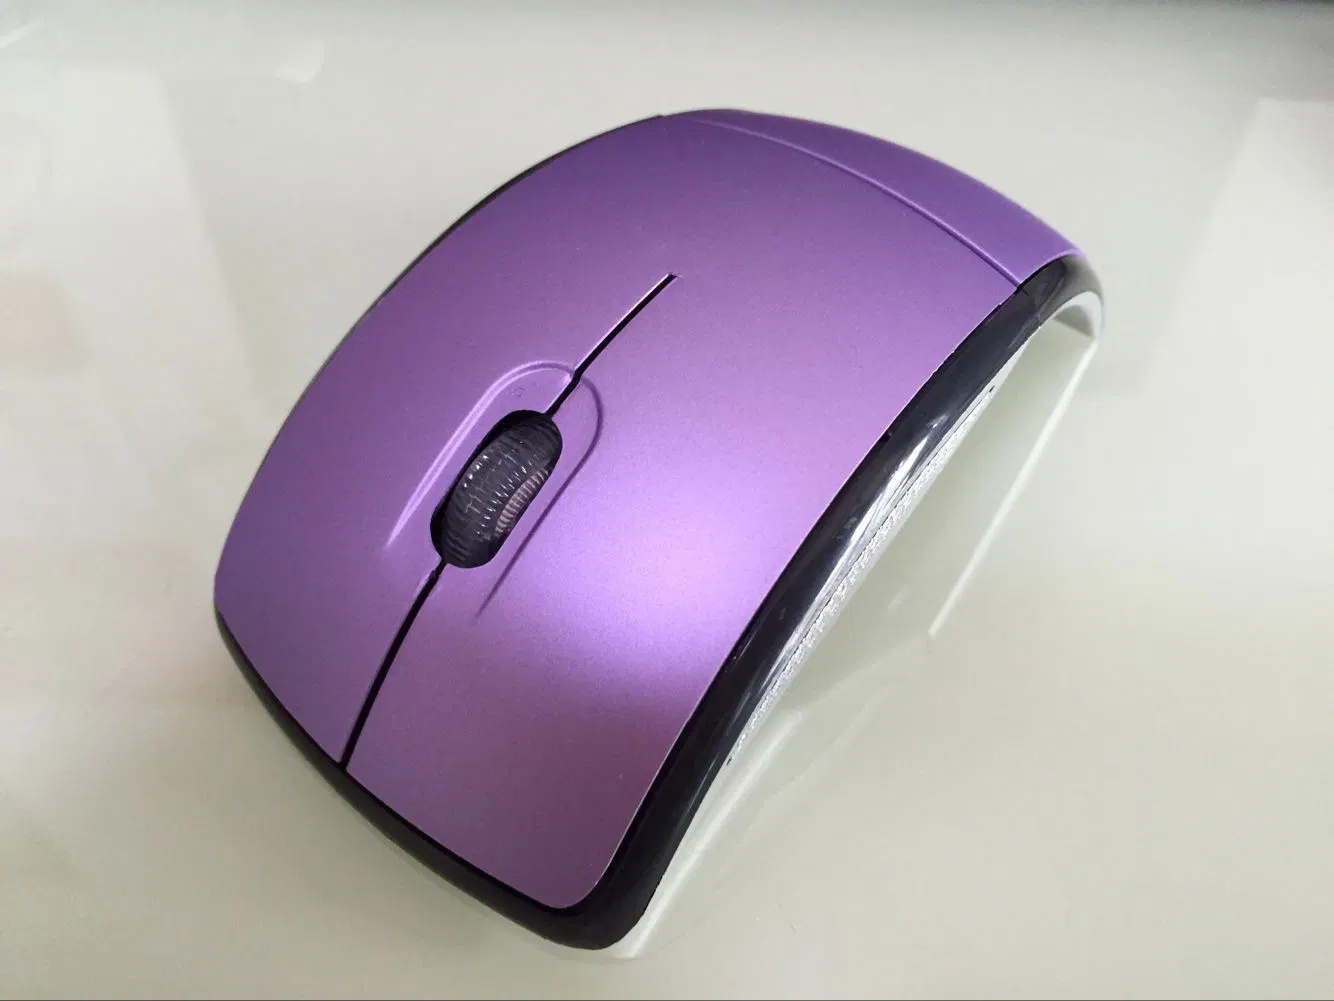 New Gift 2.4G Wireless Charging Mouse